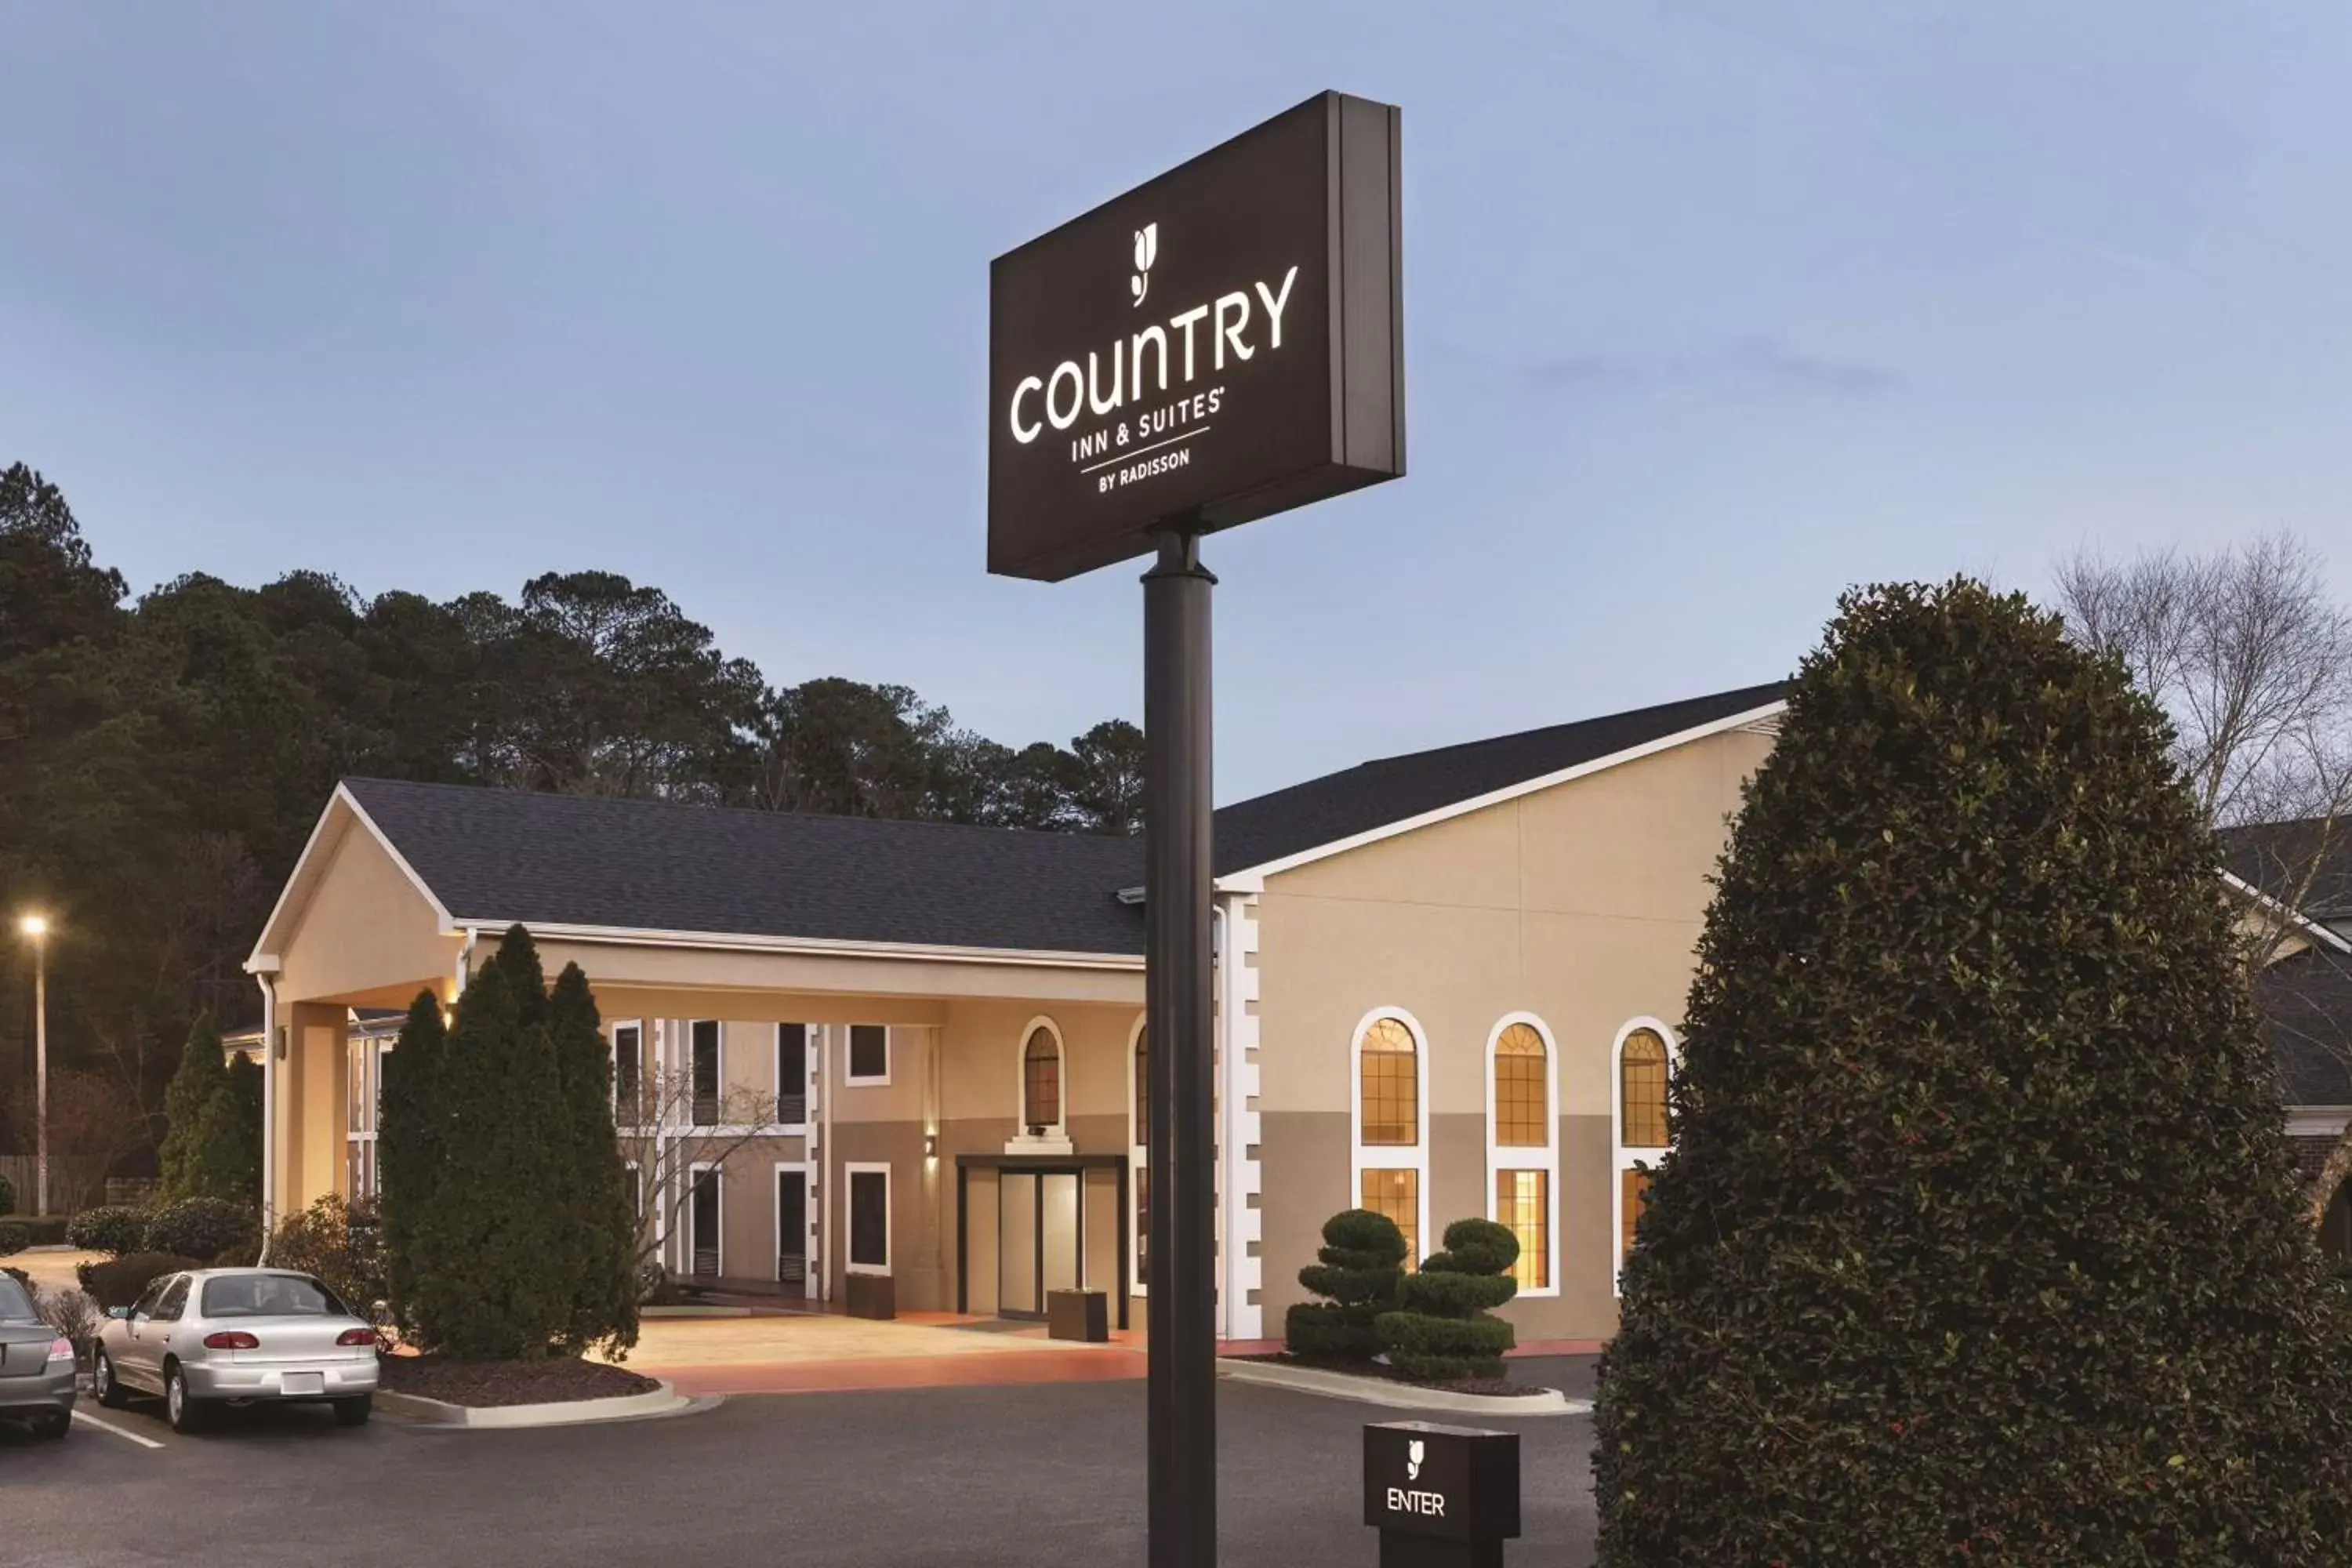 Property Building in Country Inn & Suites by Radisson, Griffin, GA